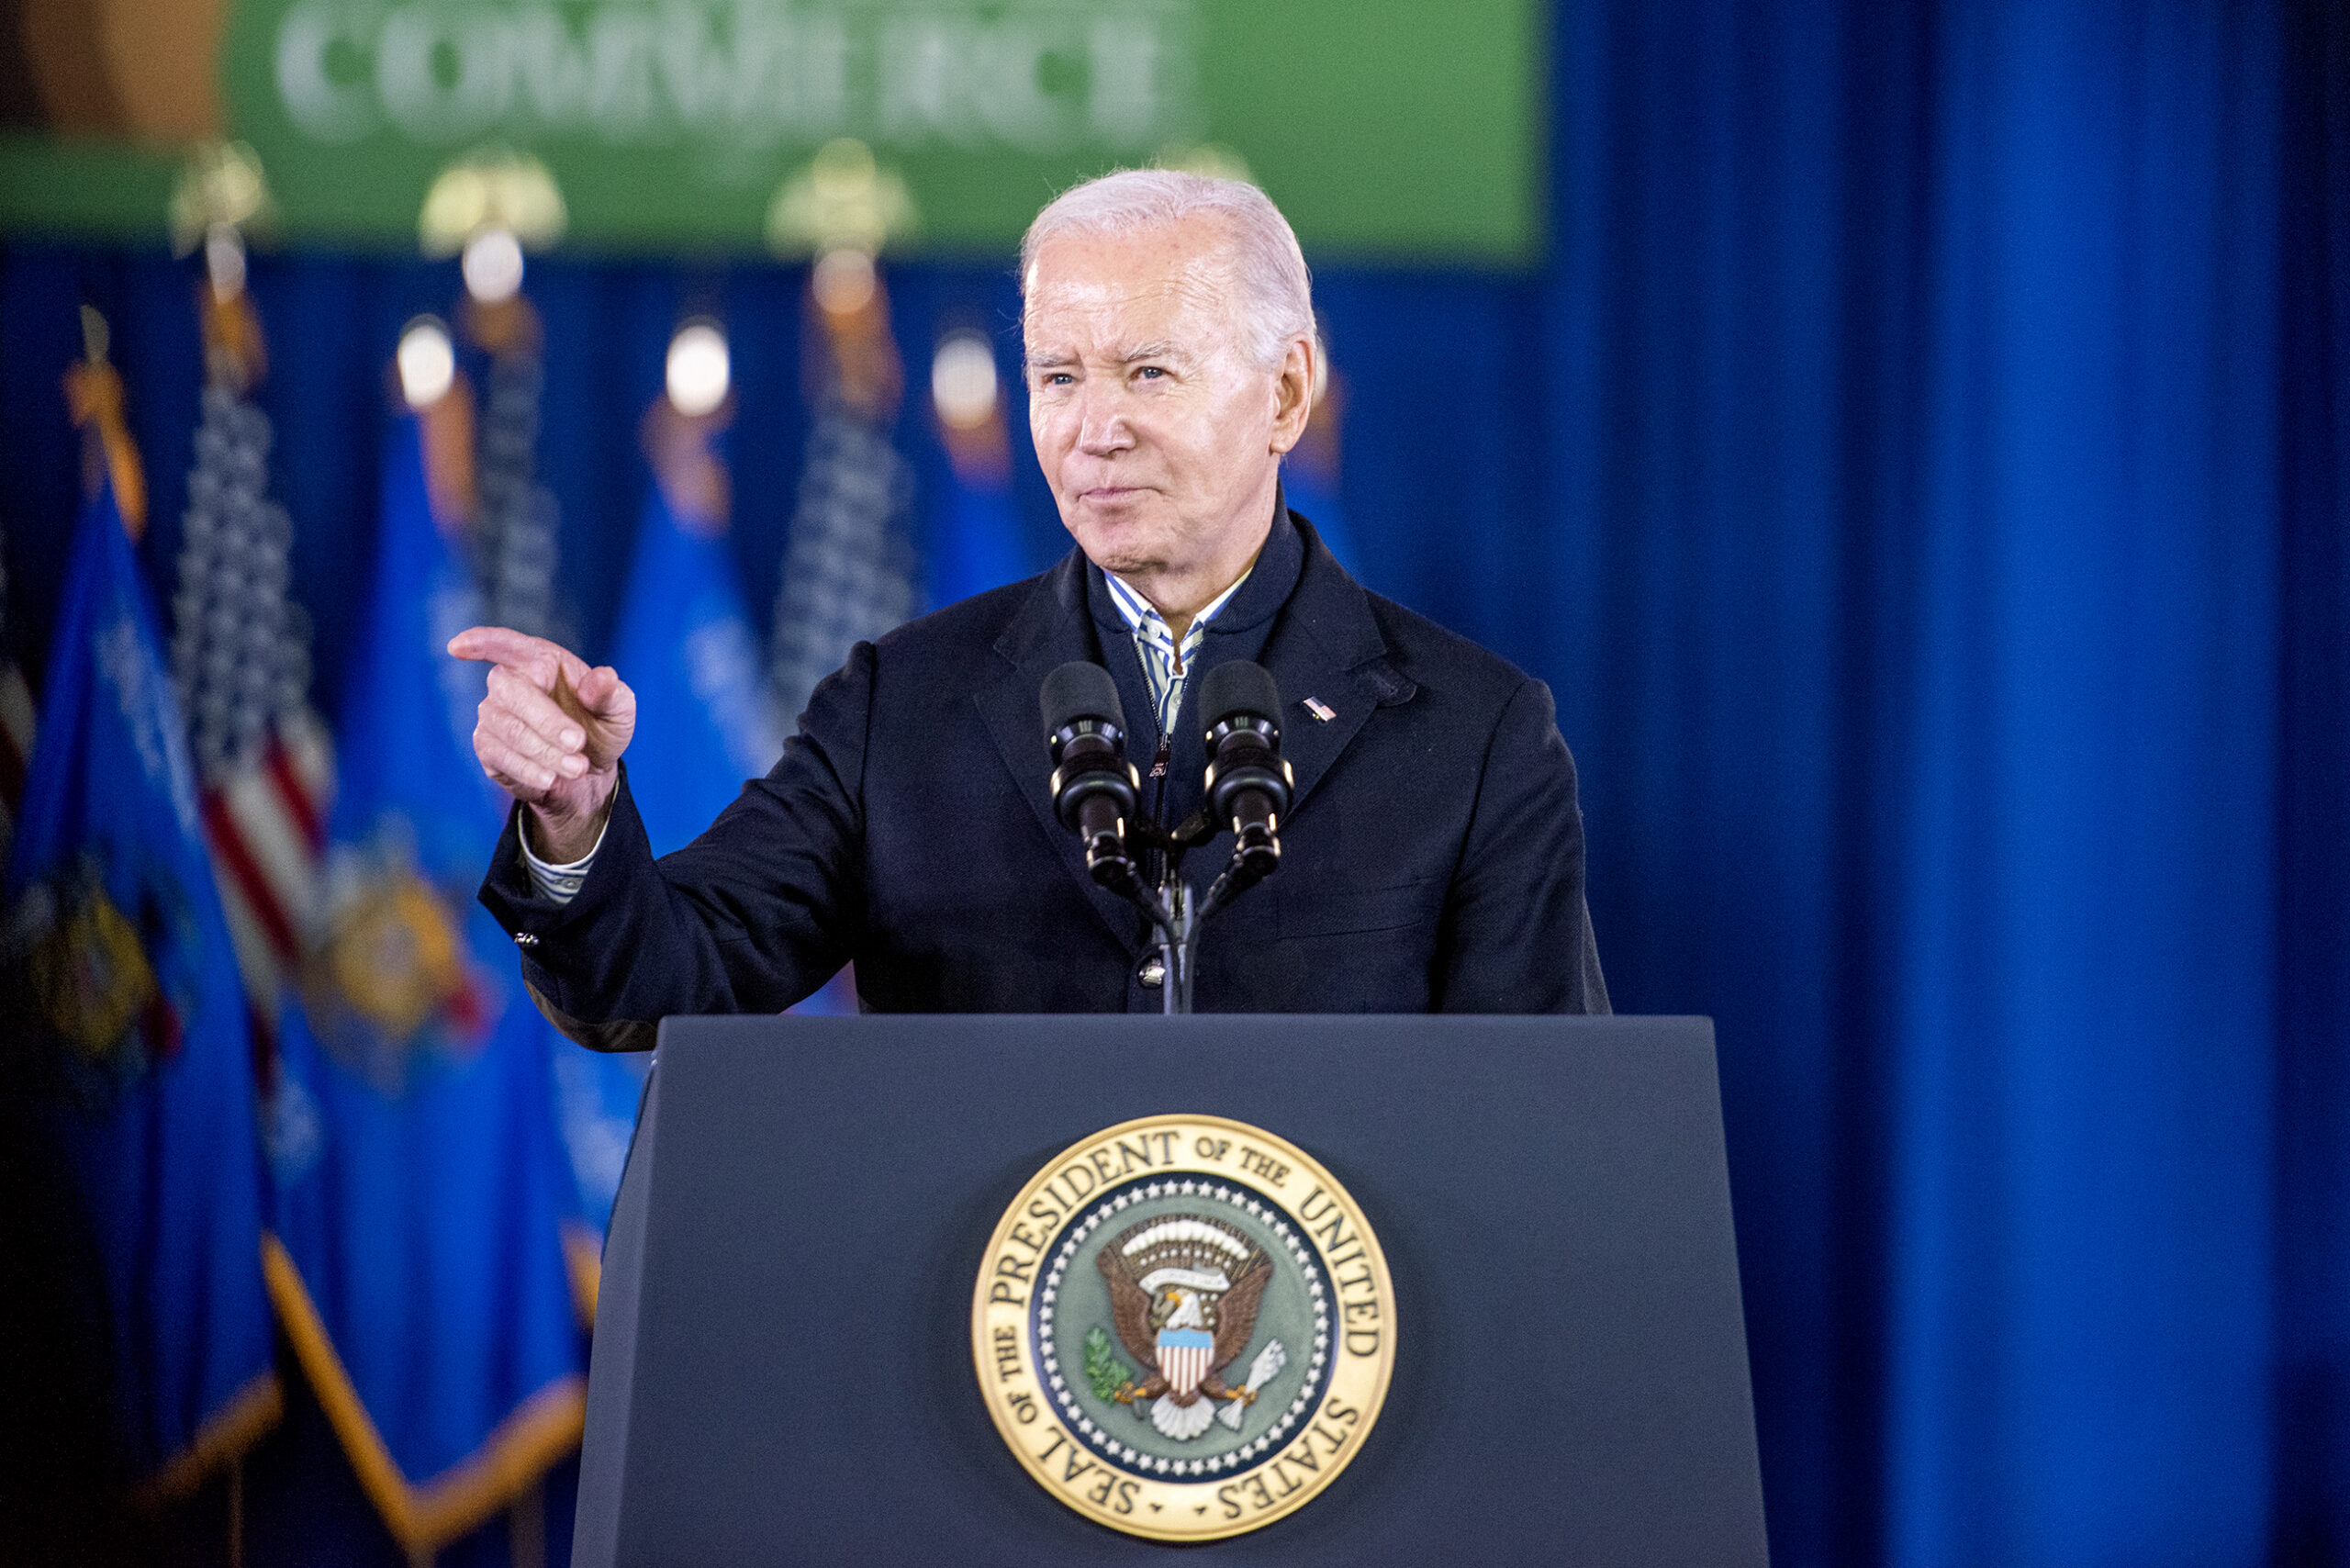 Biden points as he stands at the podium.